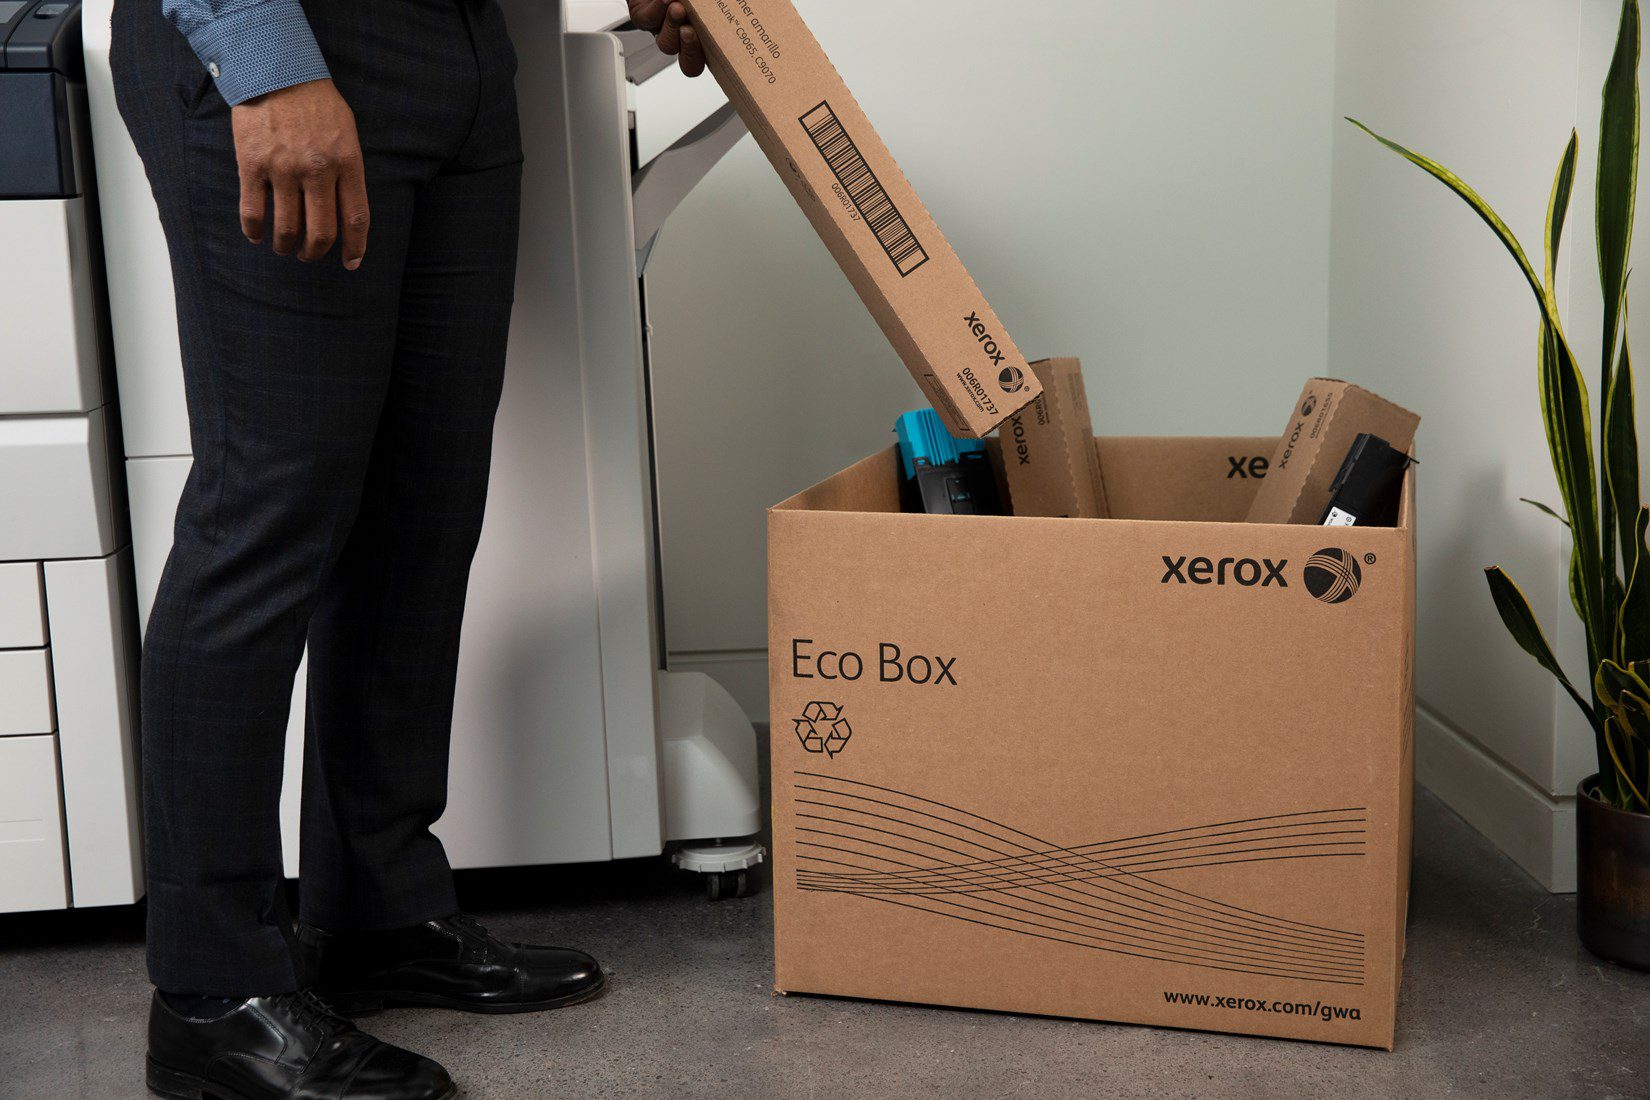 How to recycle your empty toner cartridges using the Xerox Eco Box collection service!